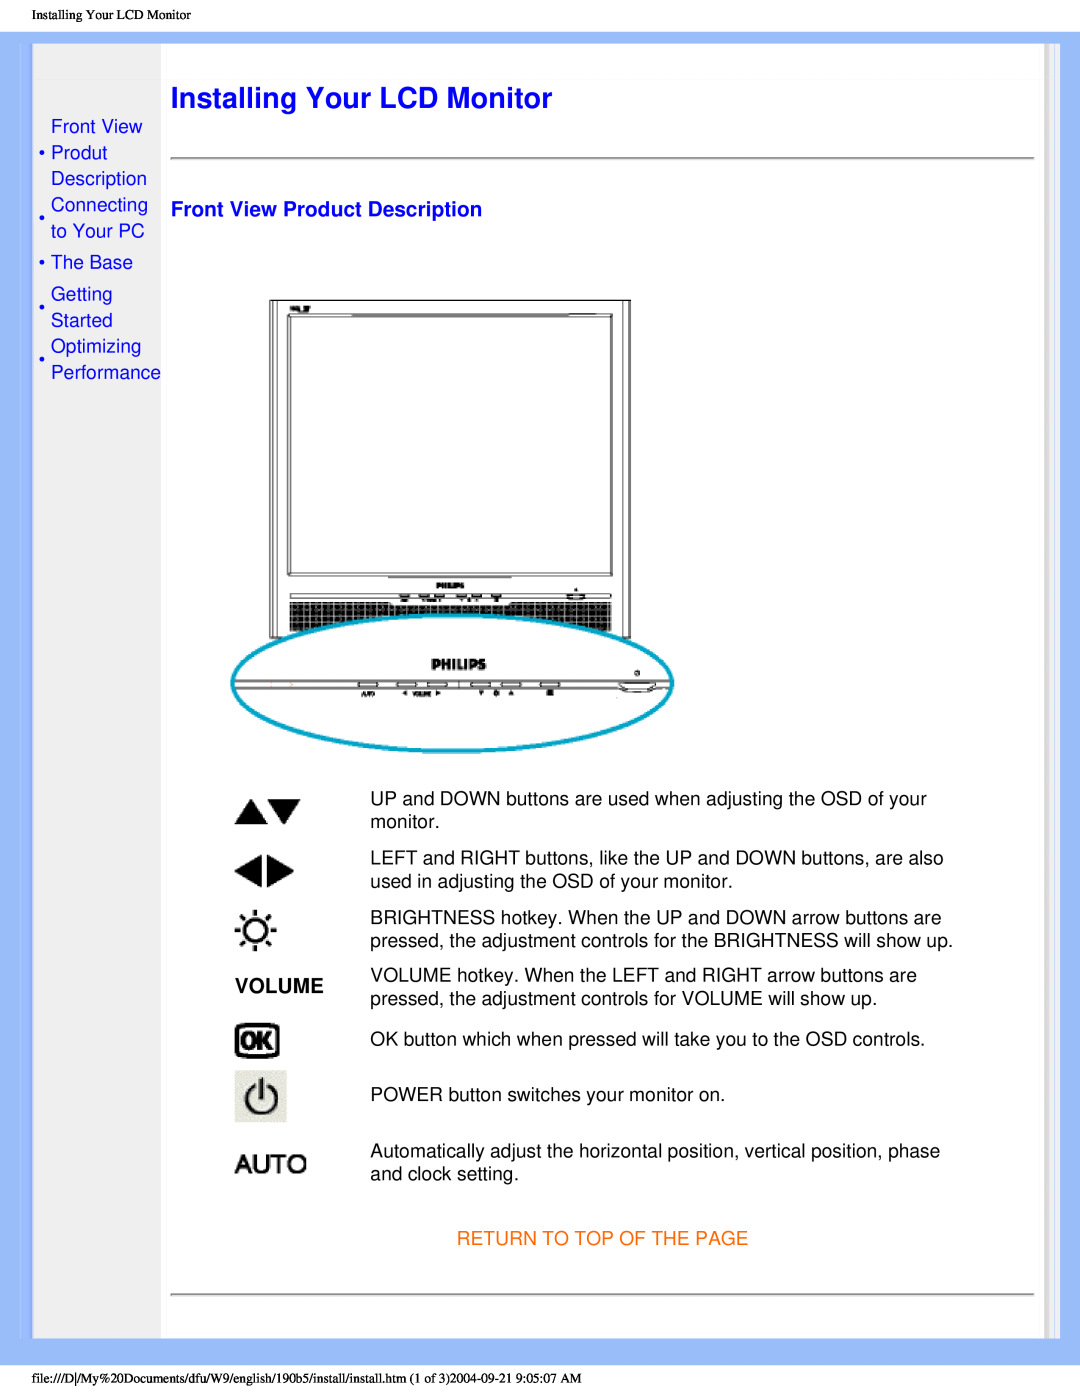 Philips 190b5 user manual Installing Your LCD Monitor, Front View Product Description, Volume, Return To Top Of The Page 